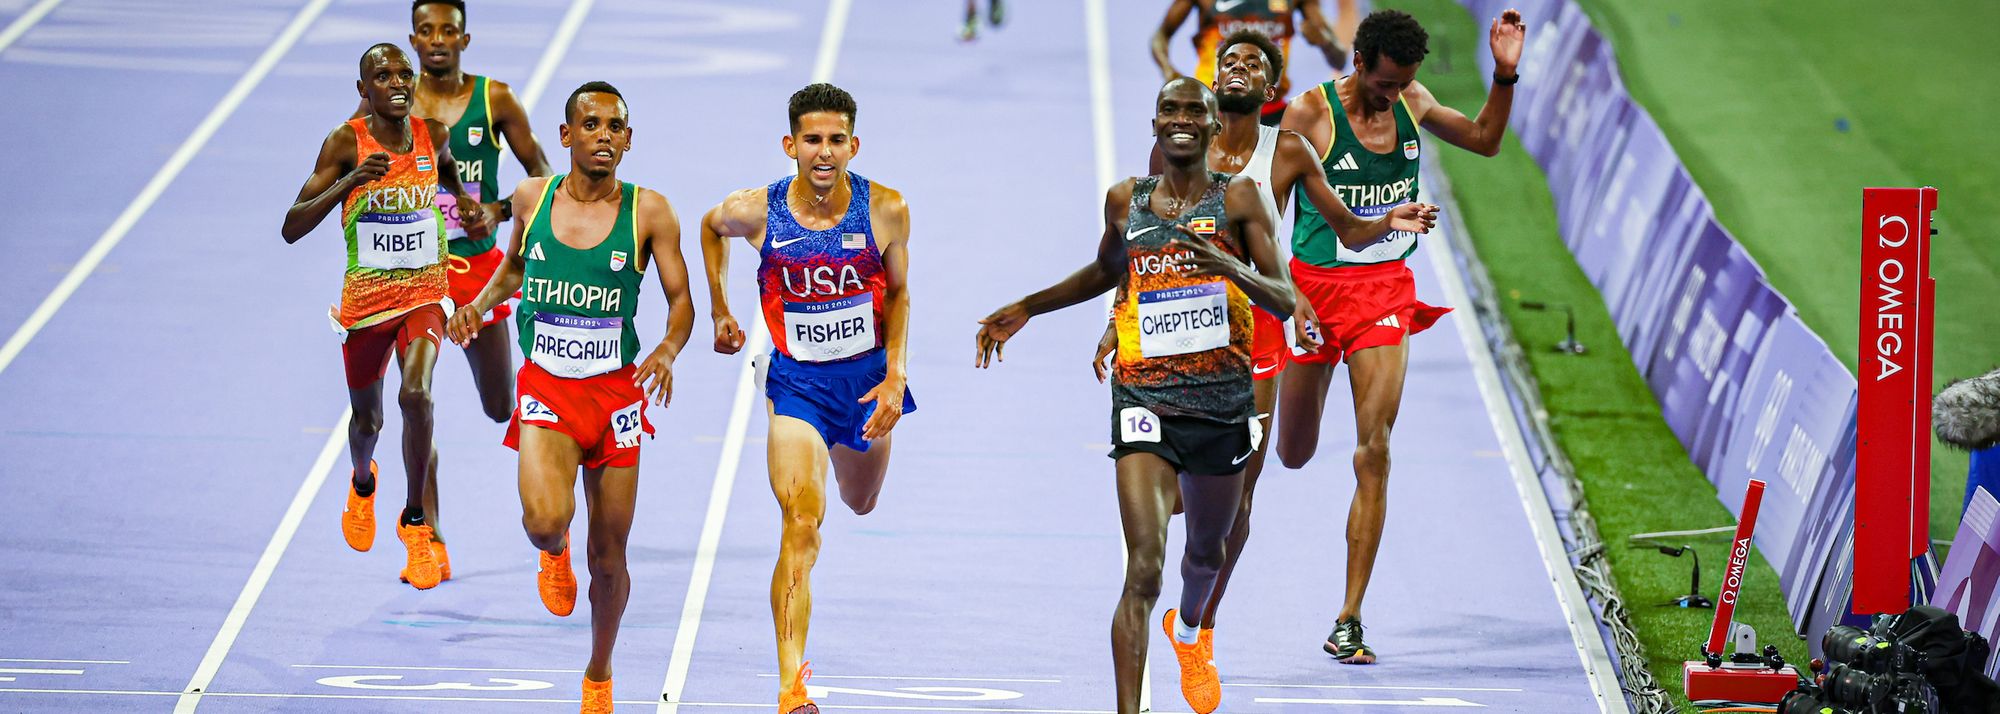 Uganda's Joshua Cheptegei won the men's 10,000m title at the Paris 2024 Olympic Games on Friday (2), finally earning the sport's highest honour at his favoured distance.